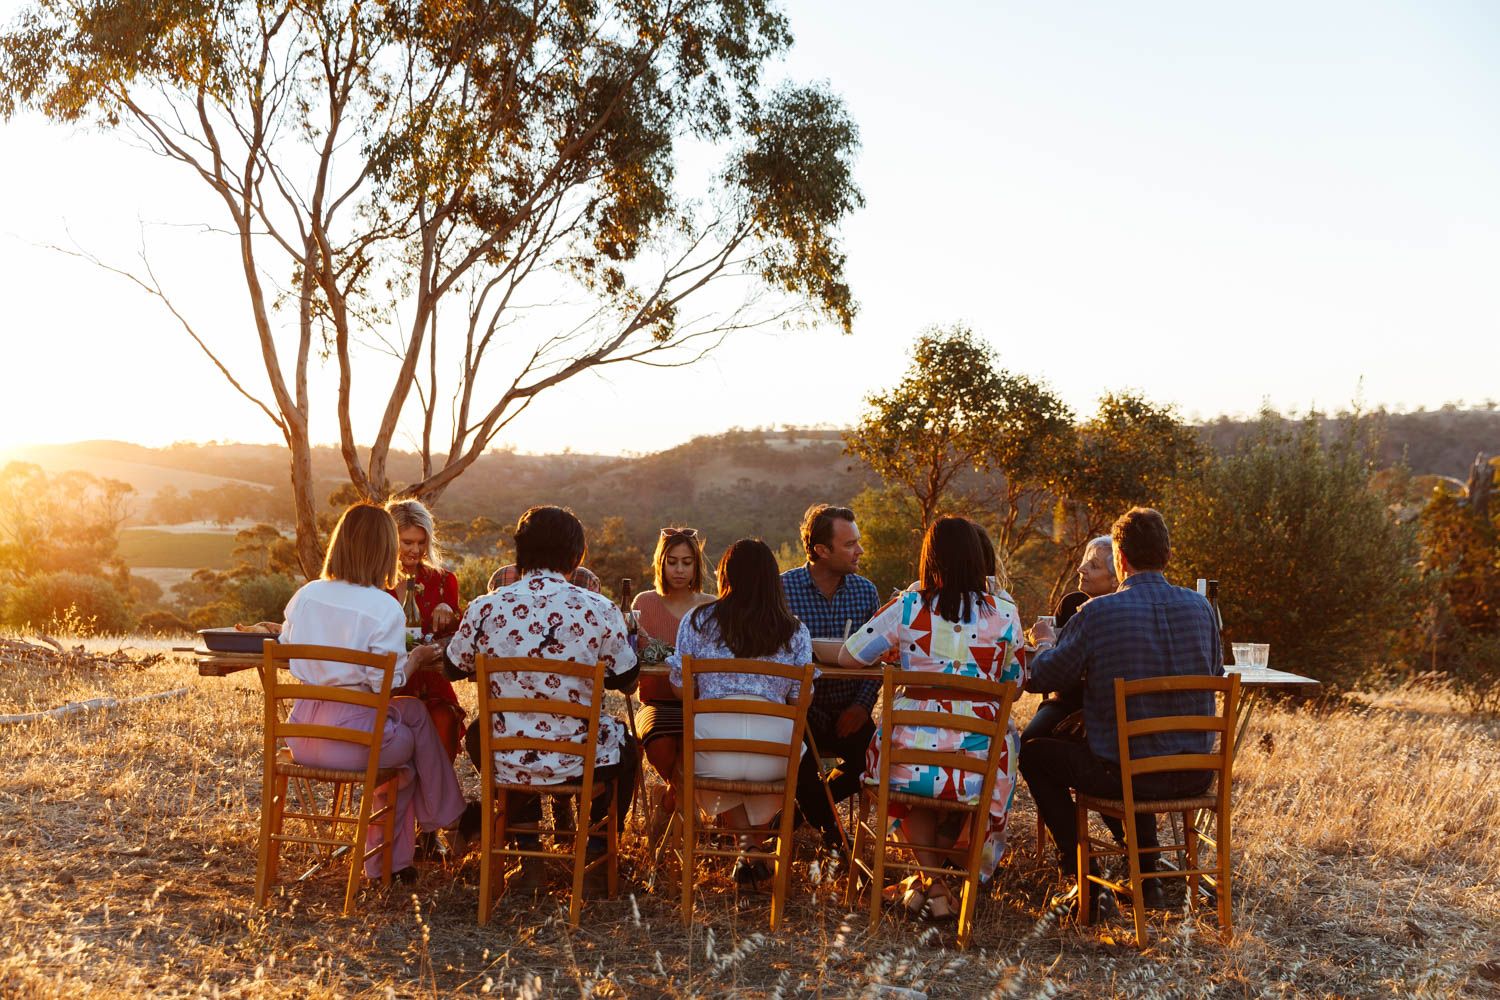 WIN two tickets to dinner at SEED Clare Valley as part of the Clare Valley Gourmet Week 2021!